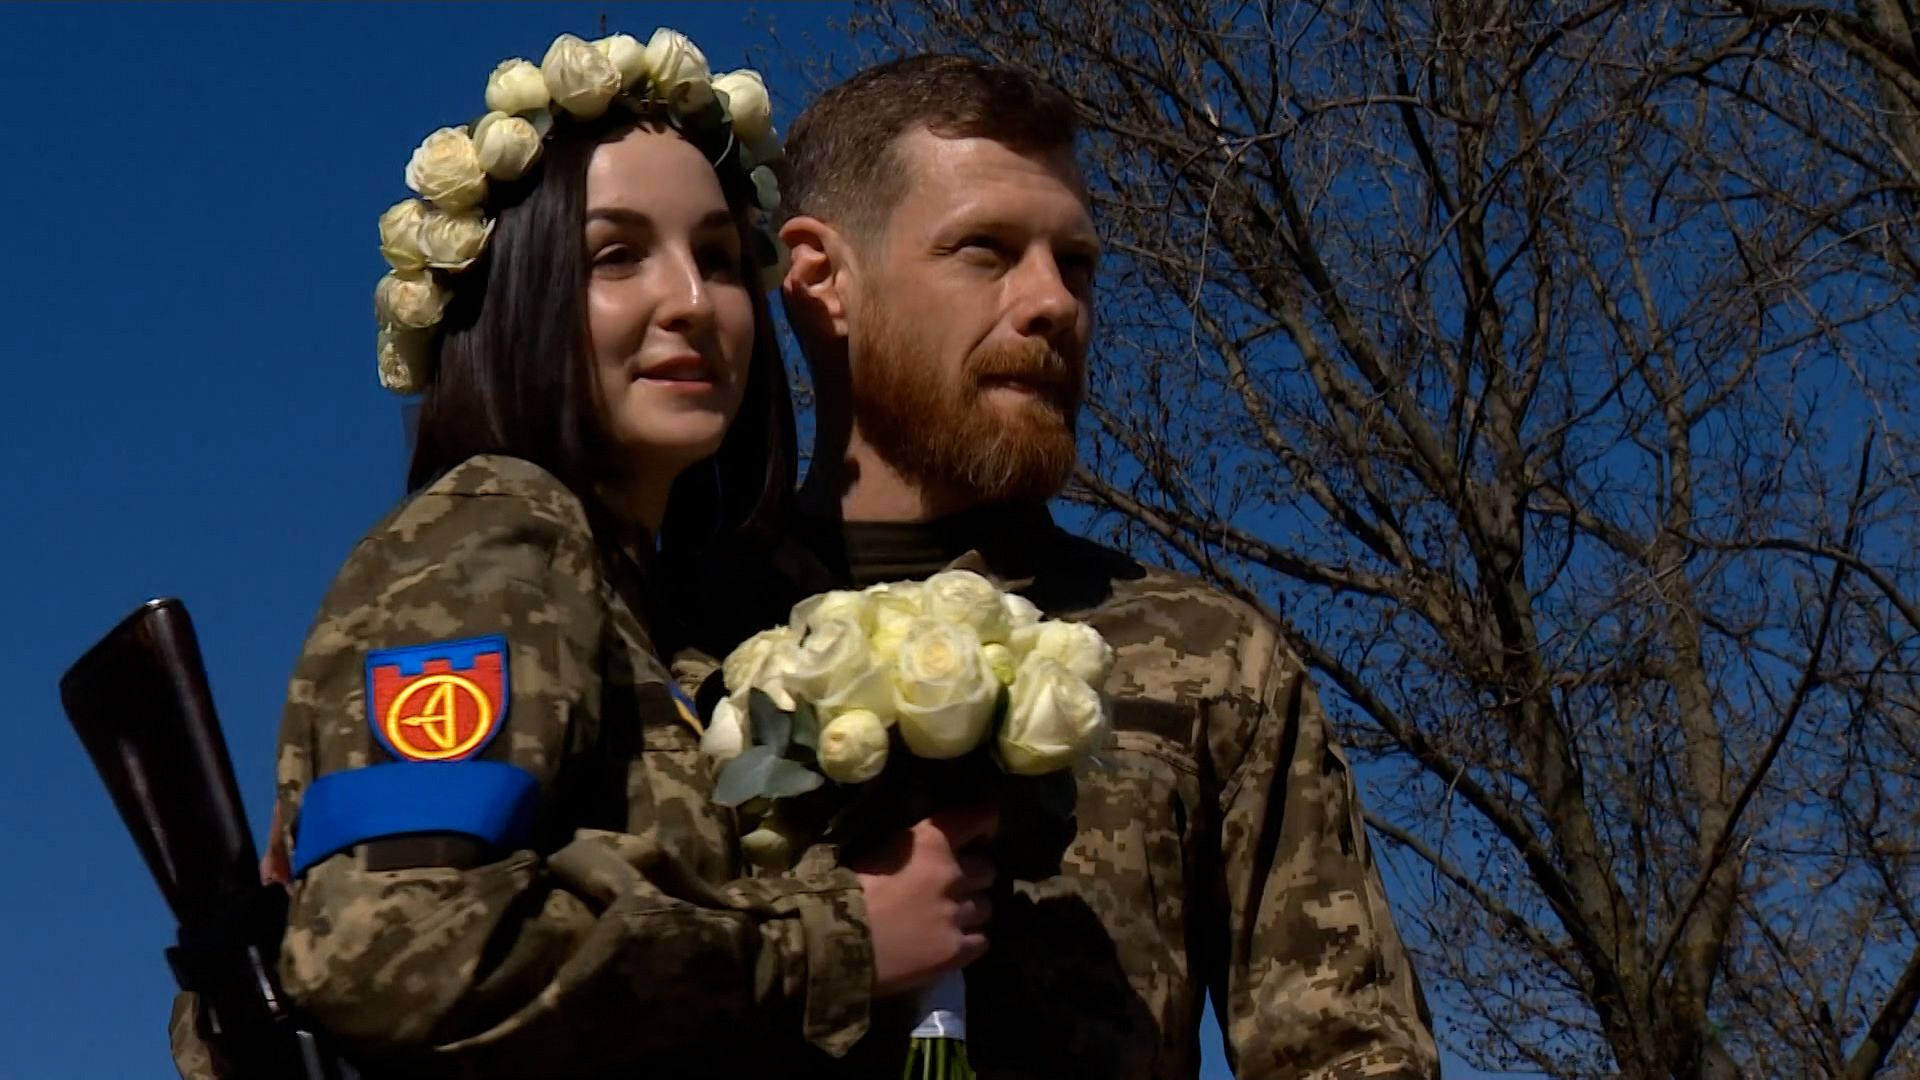 Ukrainian military couple get married in Kyiv Euronews image